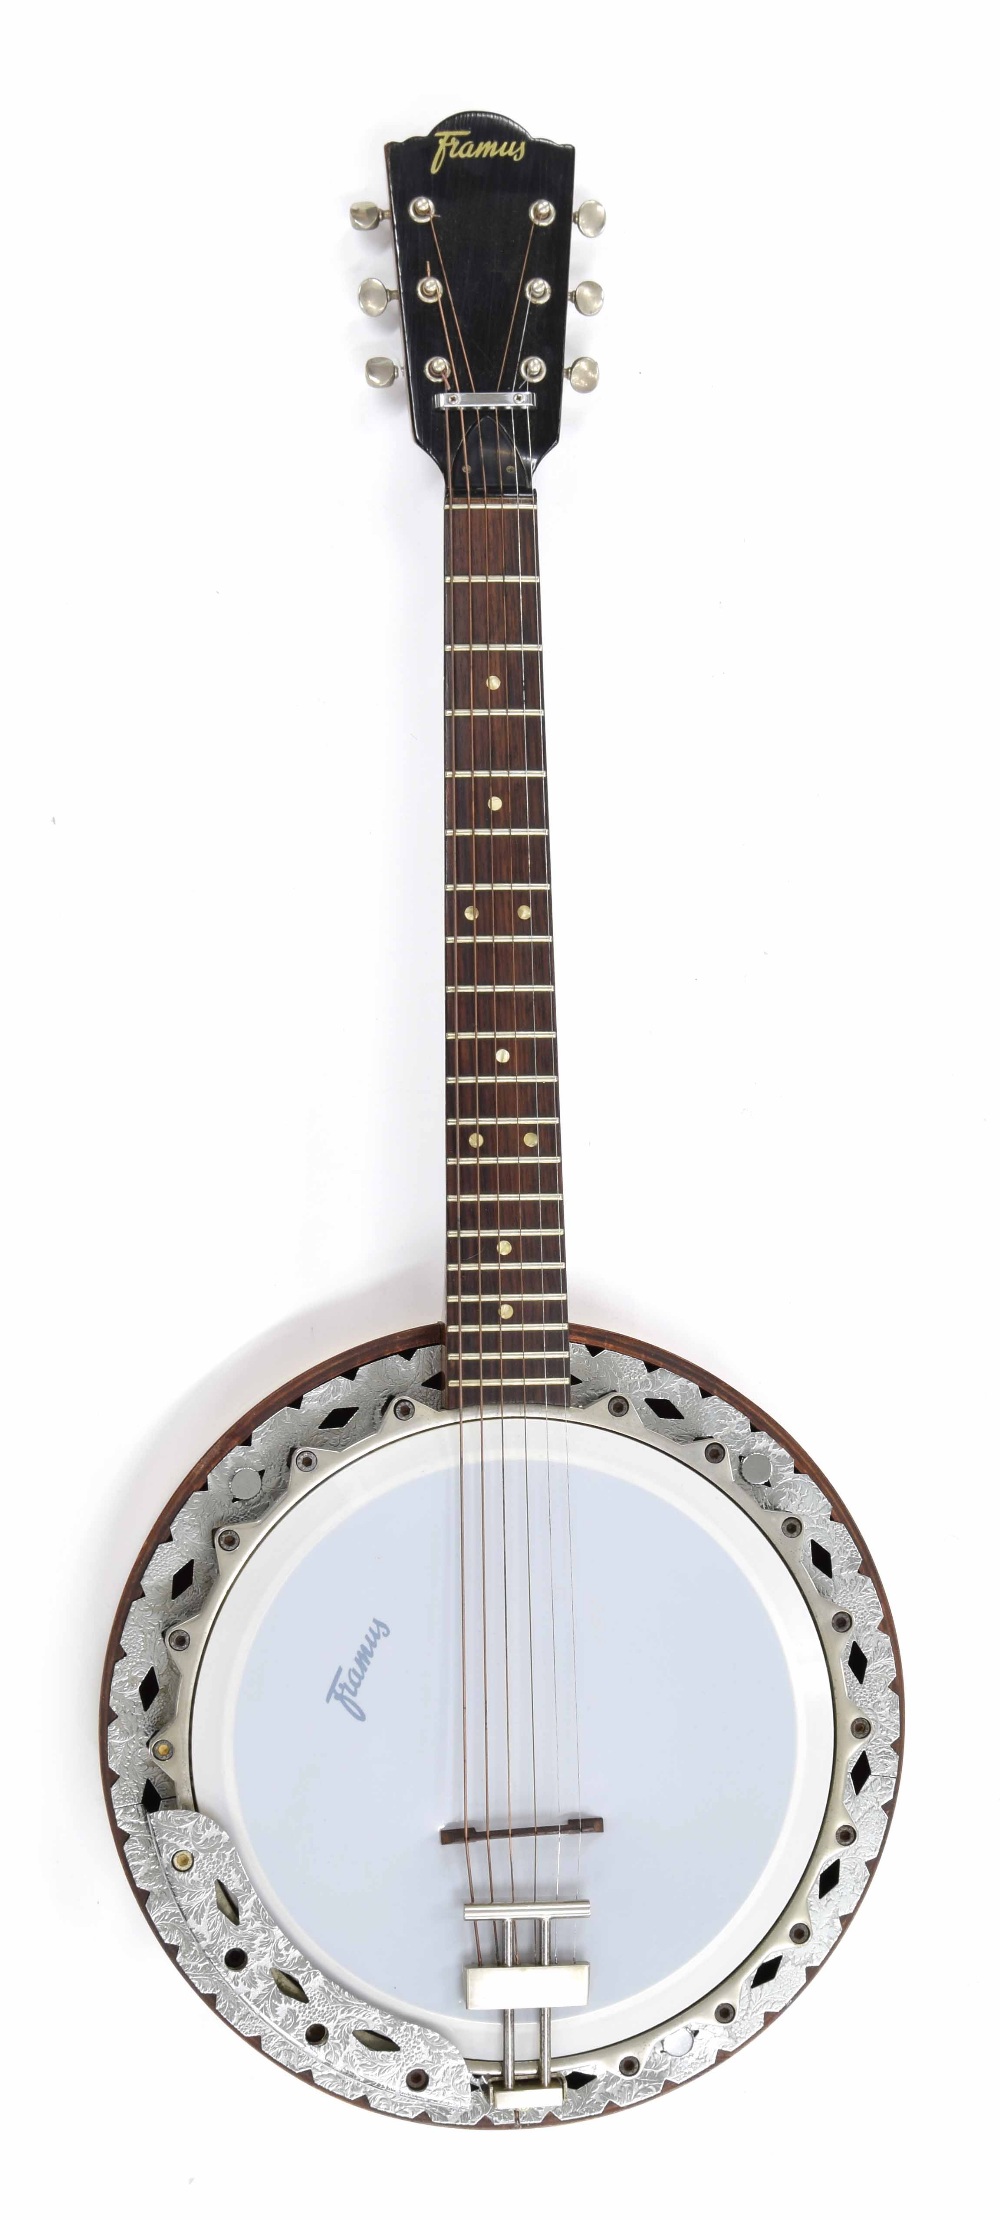 Framus six string banjo, with foliate engraved silvered mounts, mother of pearl dot inlay to the